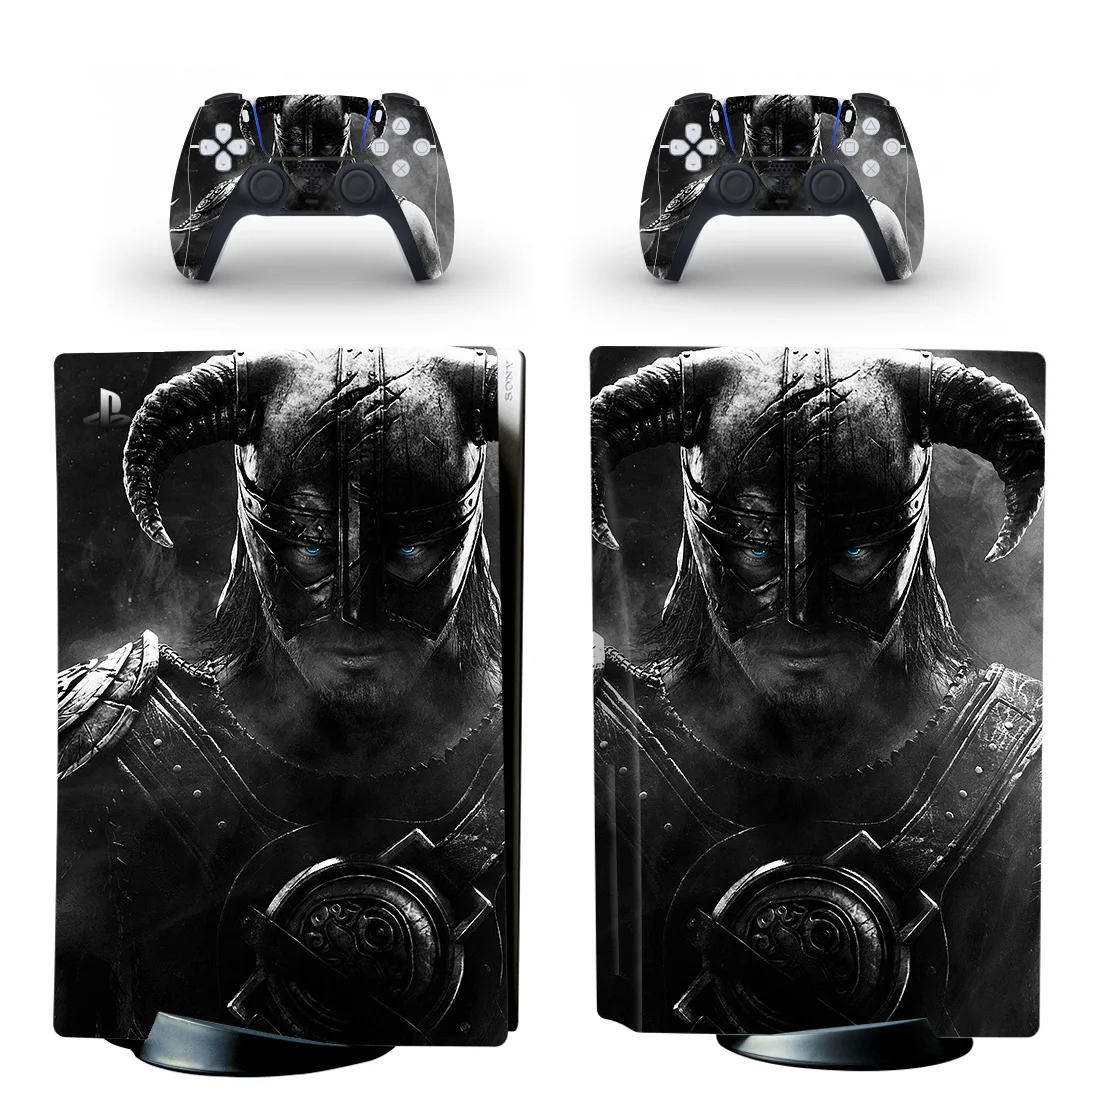 The Elder Scrolls V Skyrim PS5 Disc Skin Sticker for Playstation 5 Console & 2 Controllers Decal Vinyl Protective Disk Skins 0